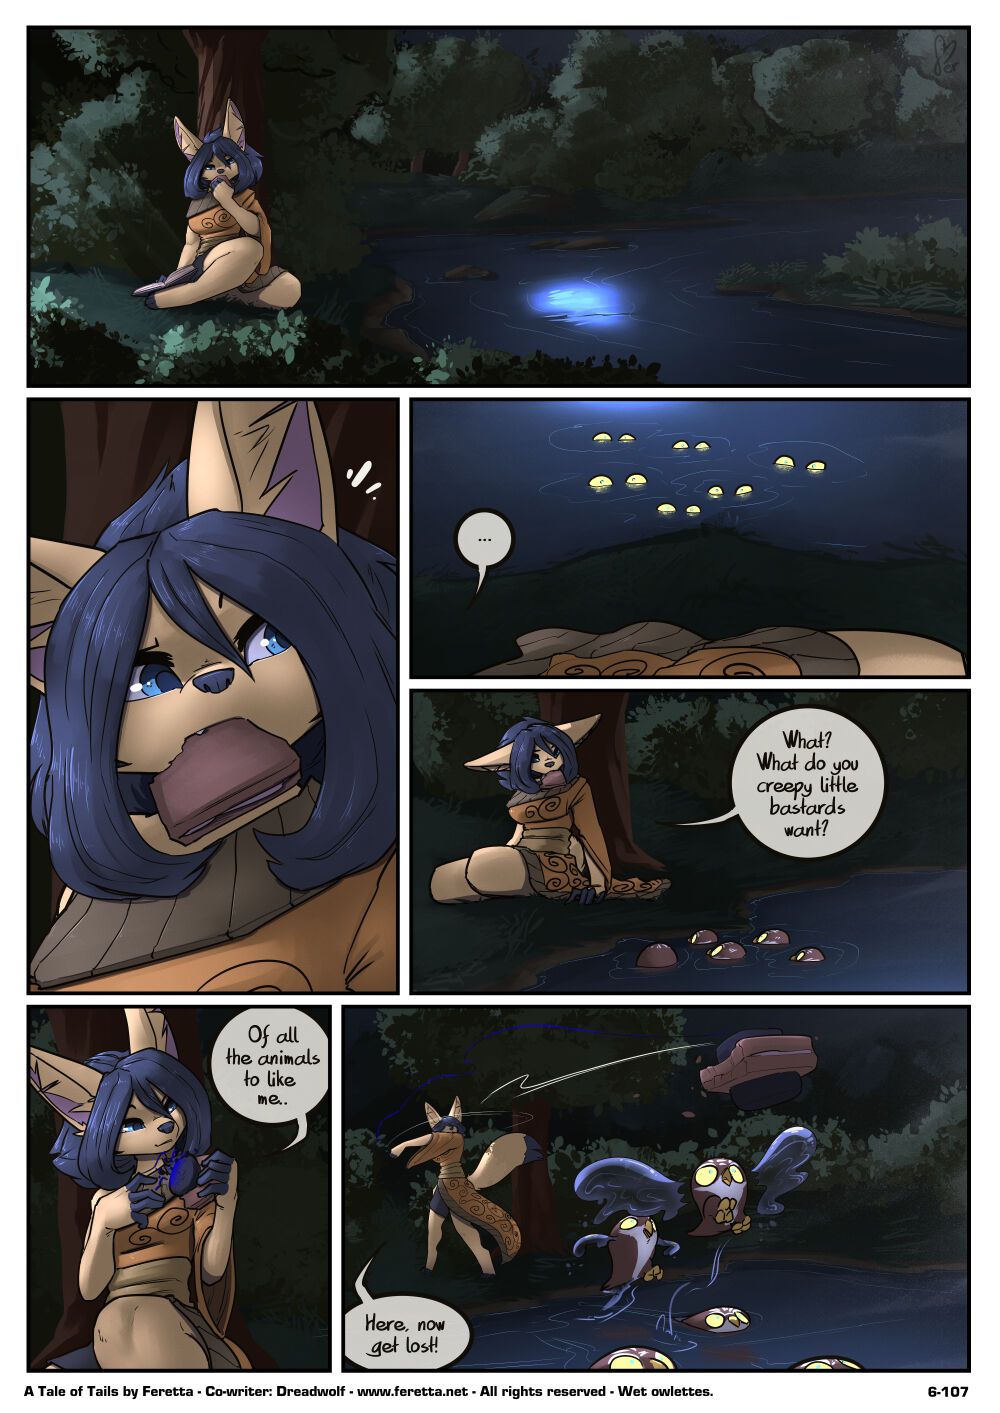 [Feretta] Farellian Legends: A Tale of Tails (w/Extras) [Ongoing] 402